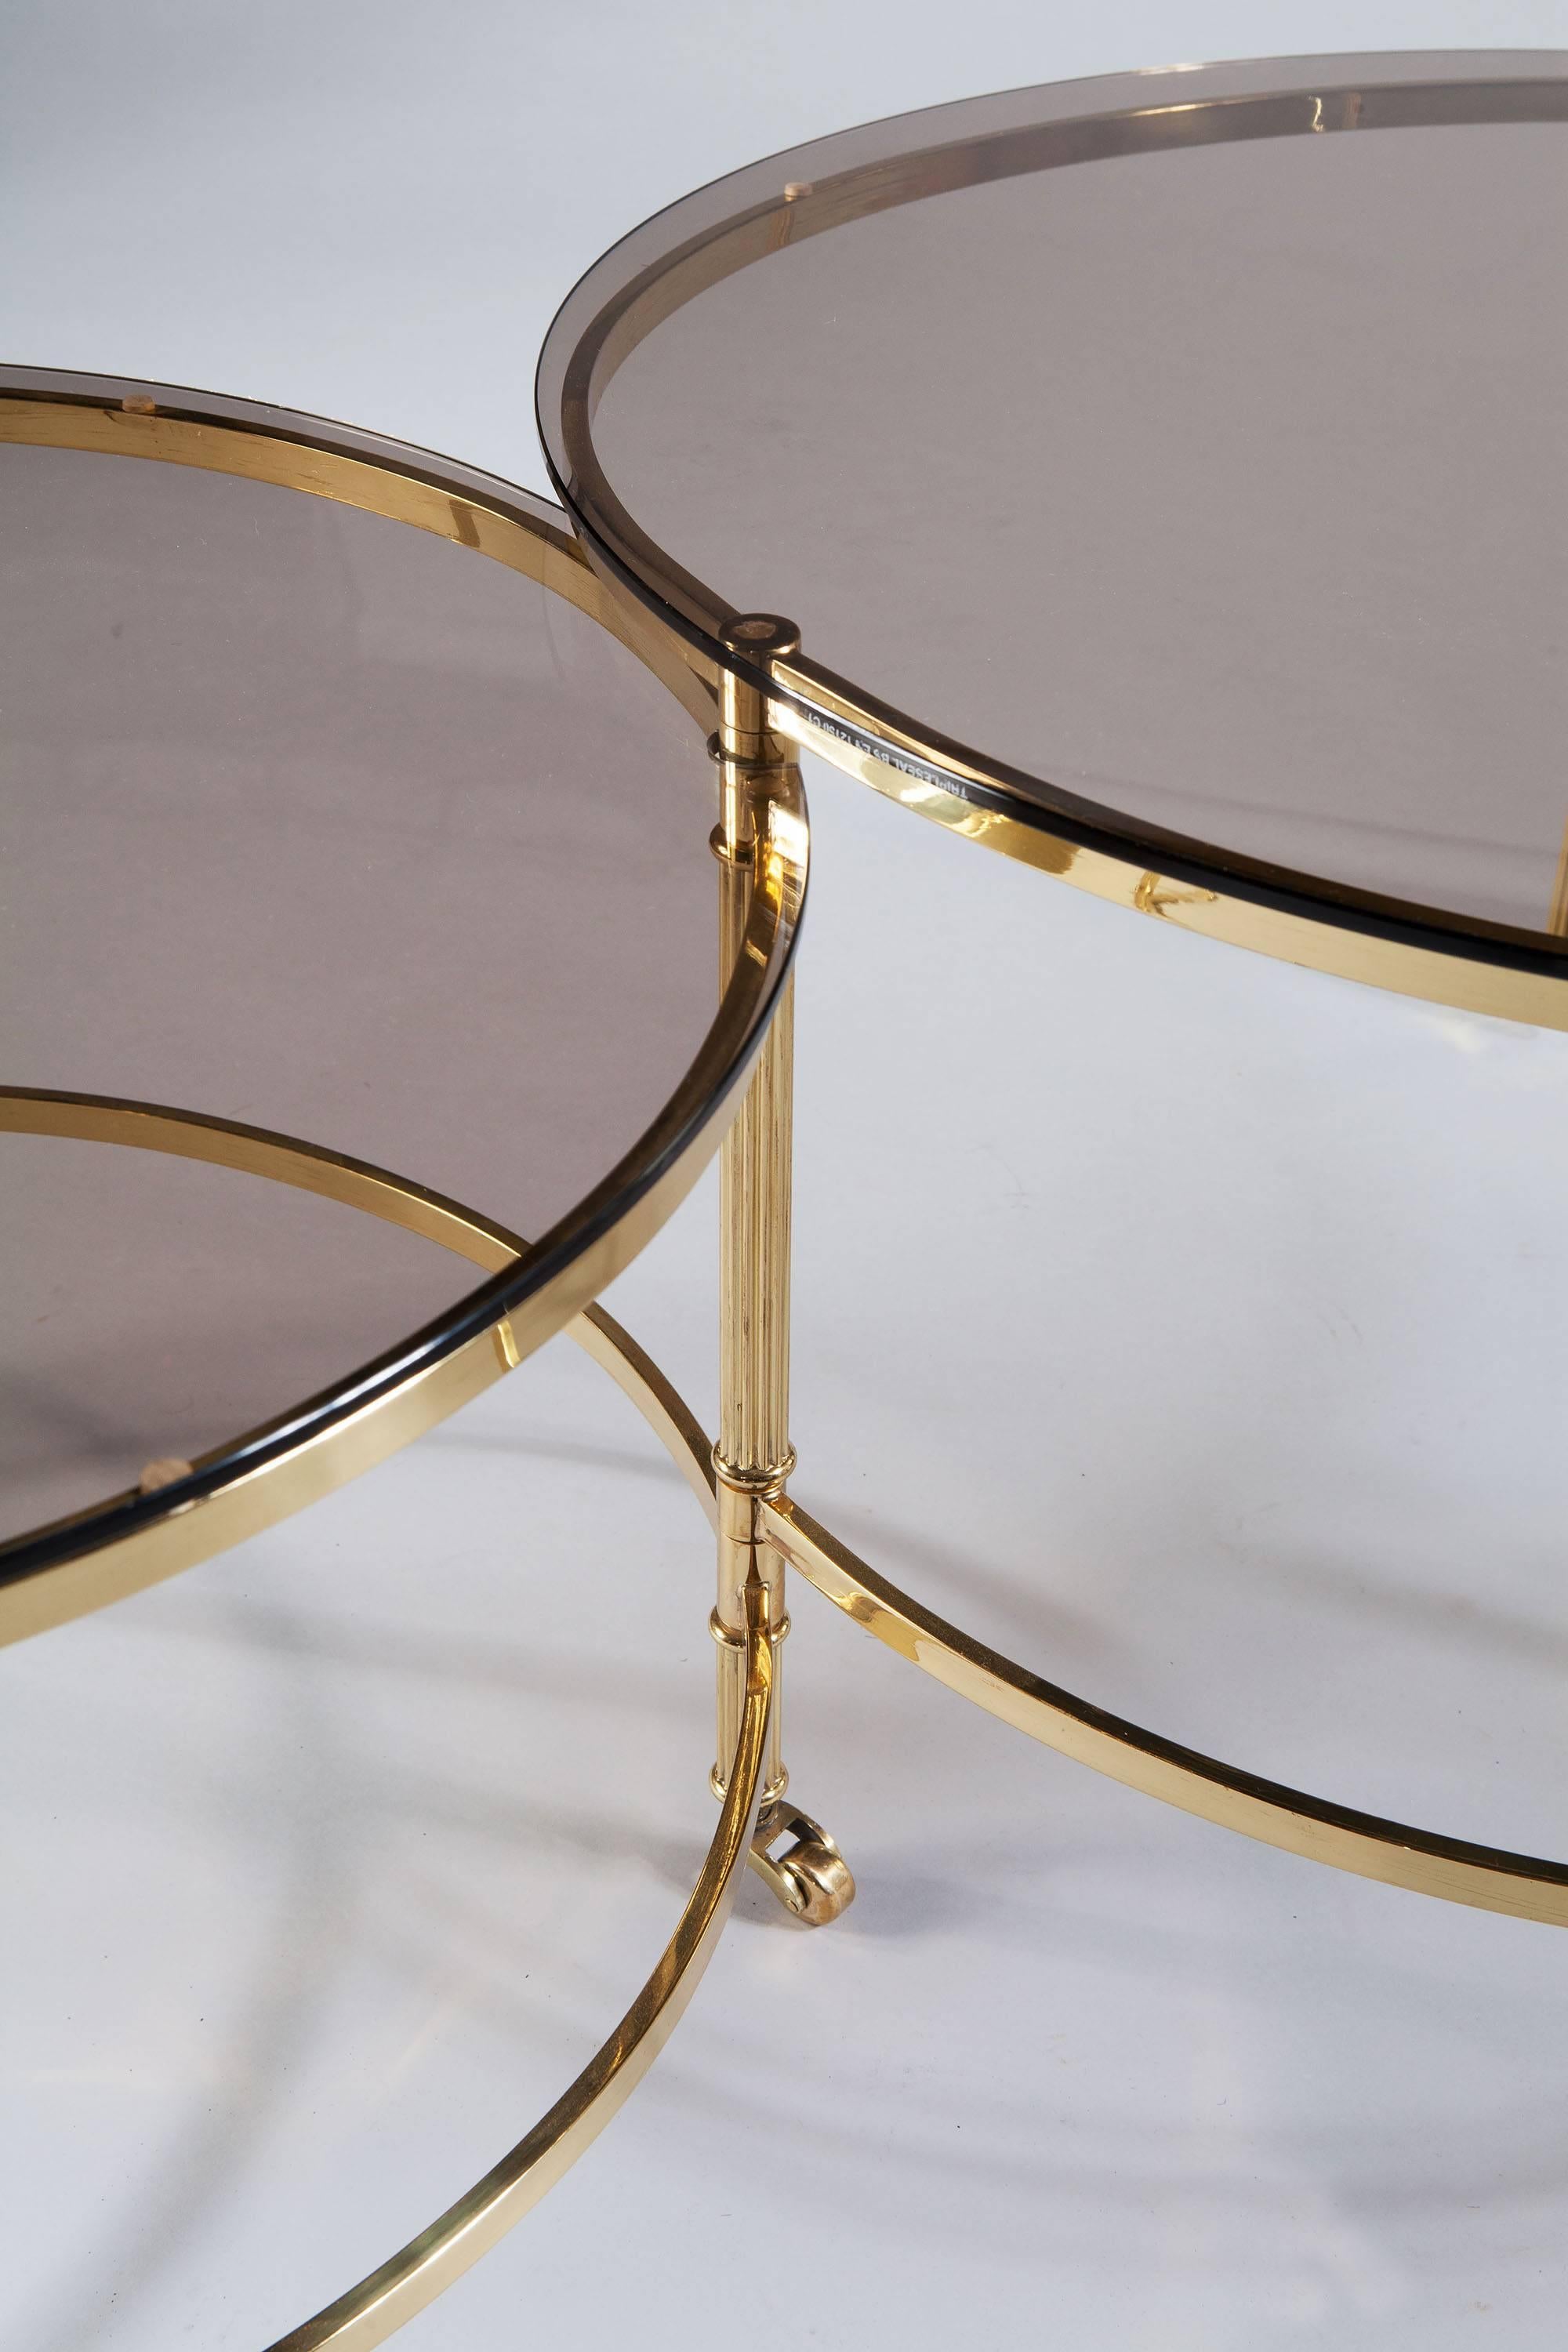 Mid-Century Concentric Brass Coffee Table In Excellent Condition In London, by appointment only